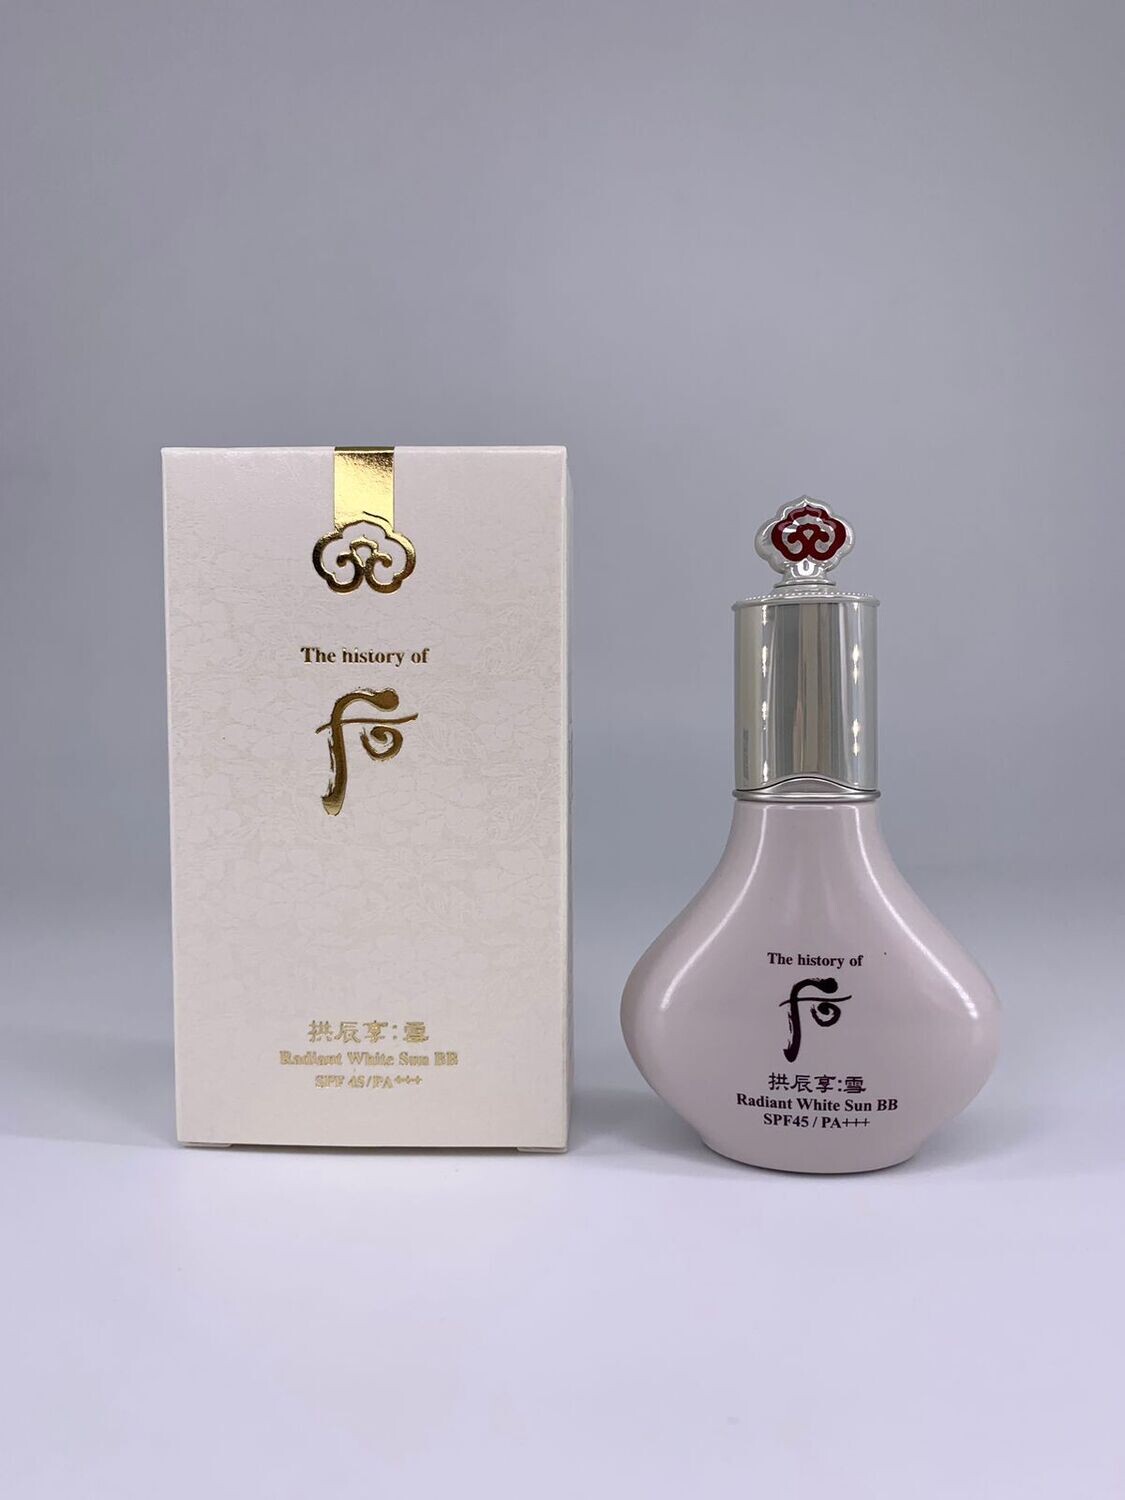 The history of Whoo Gongjinhyang: Seol Radiant White Sun BB SPF 45/PA++